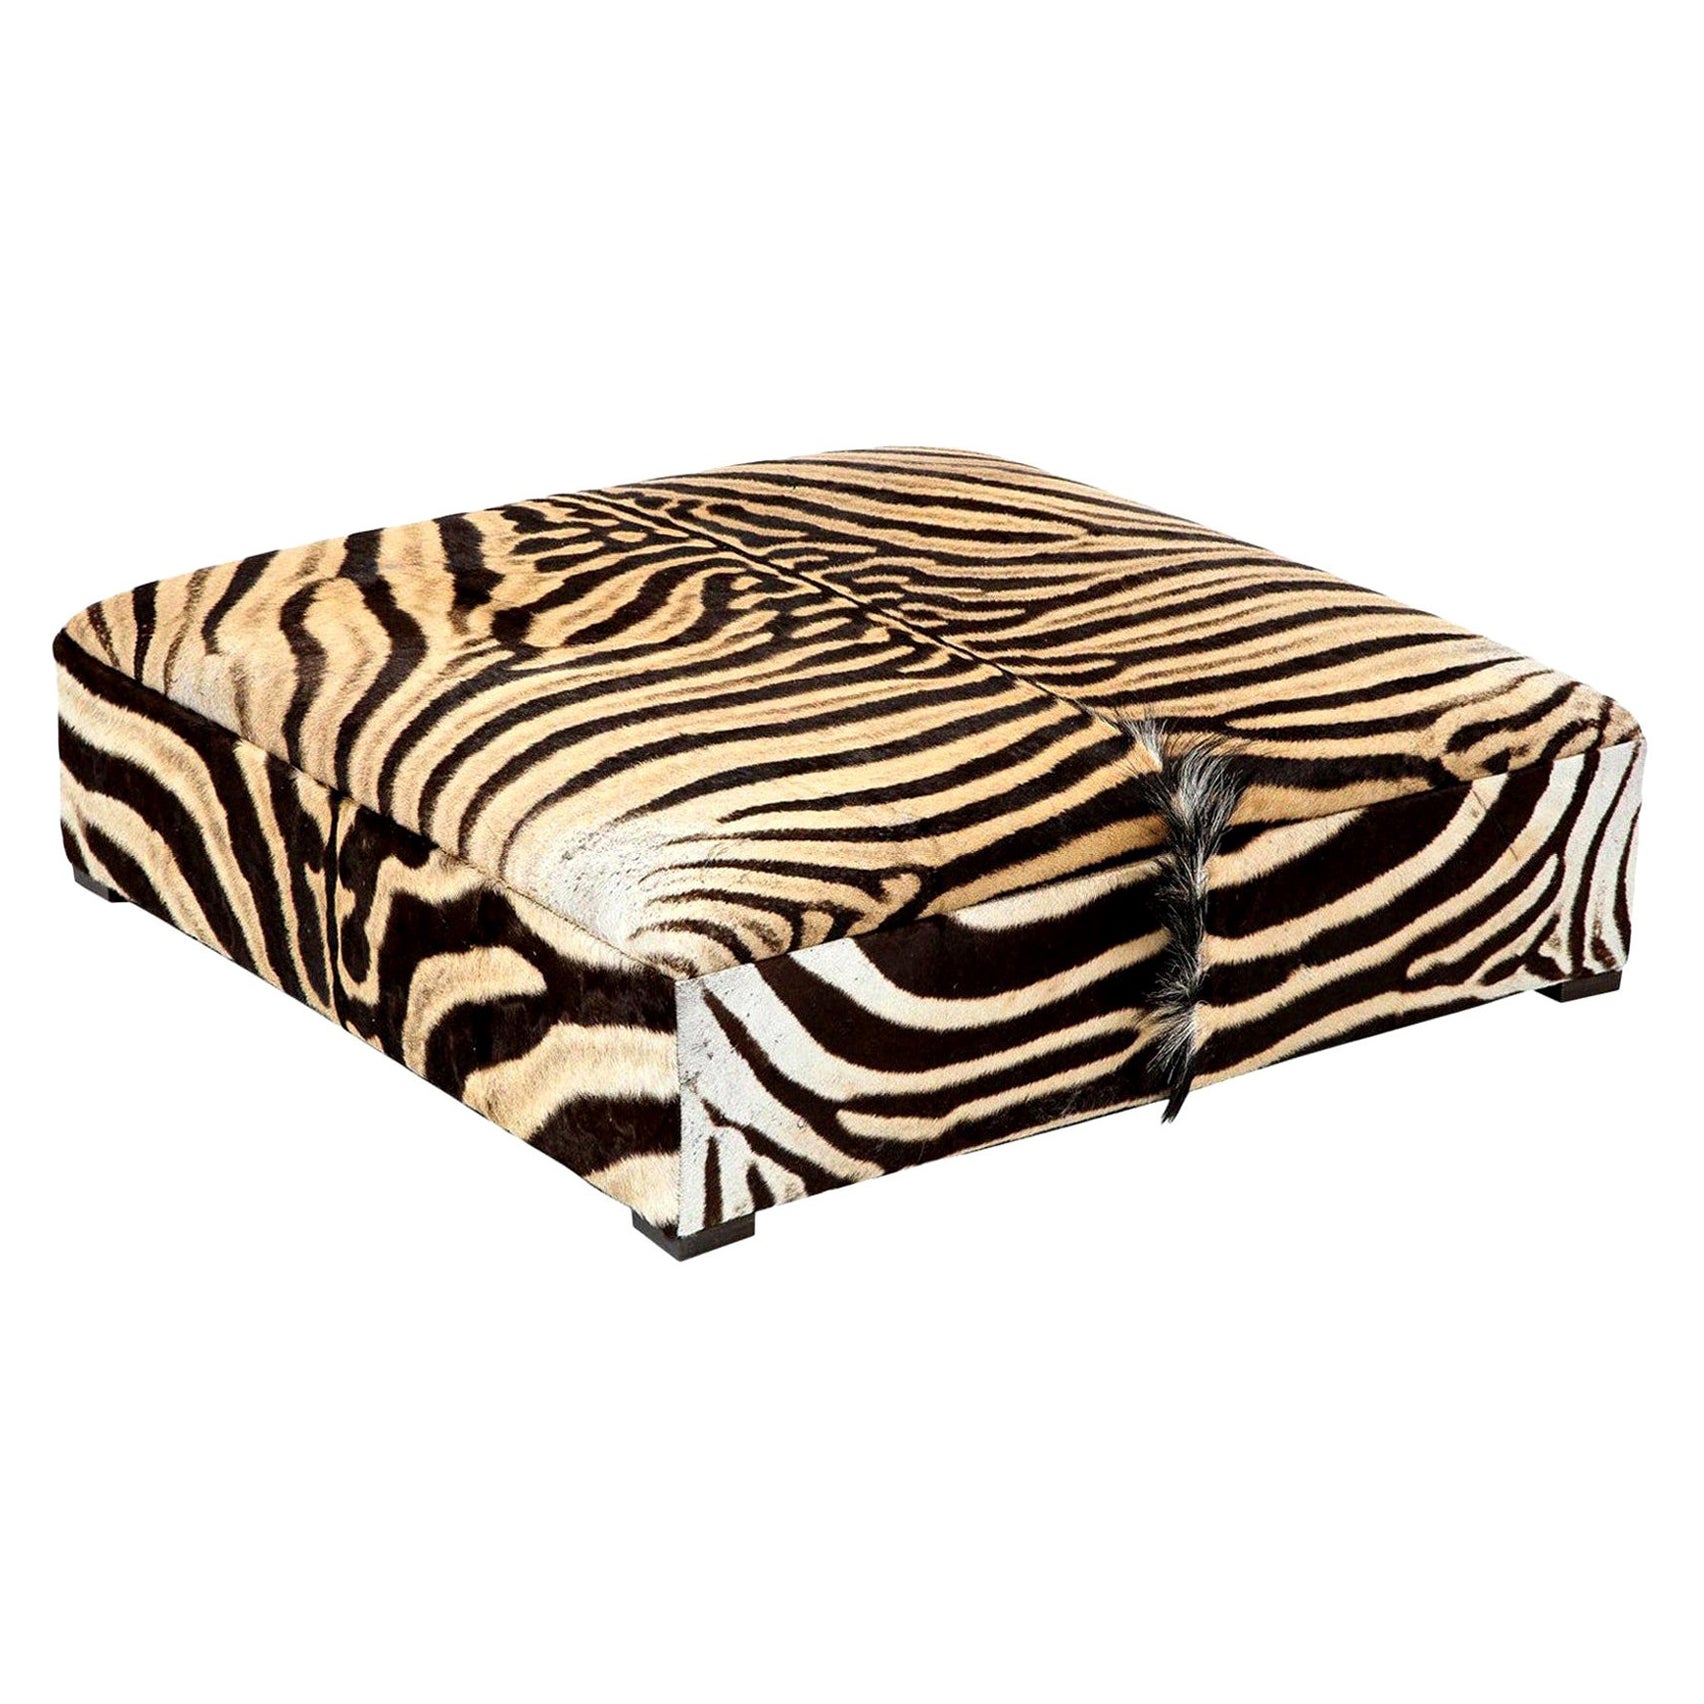 Zebra Ottoman / Coffee Table, Large Square, Chocolate, Brass Legs, in Stock, USA